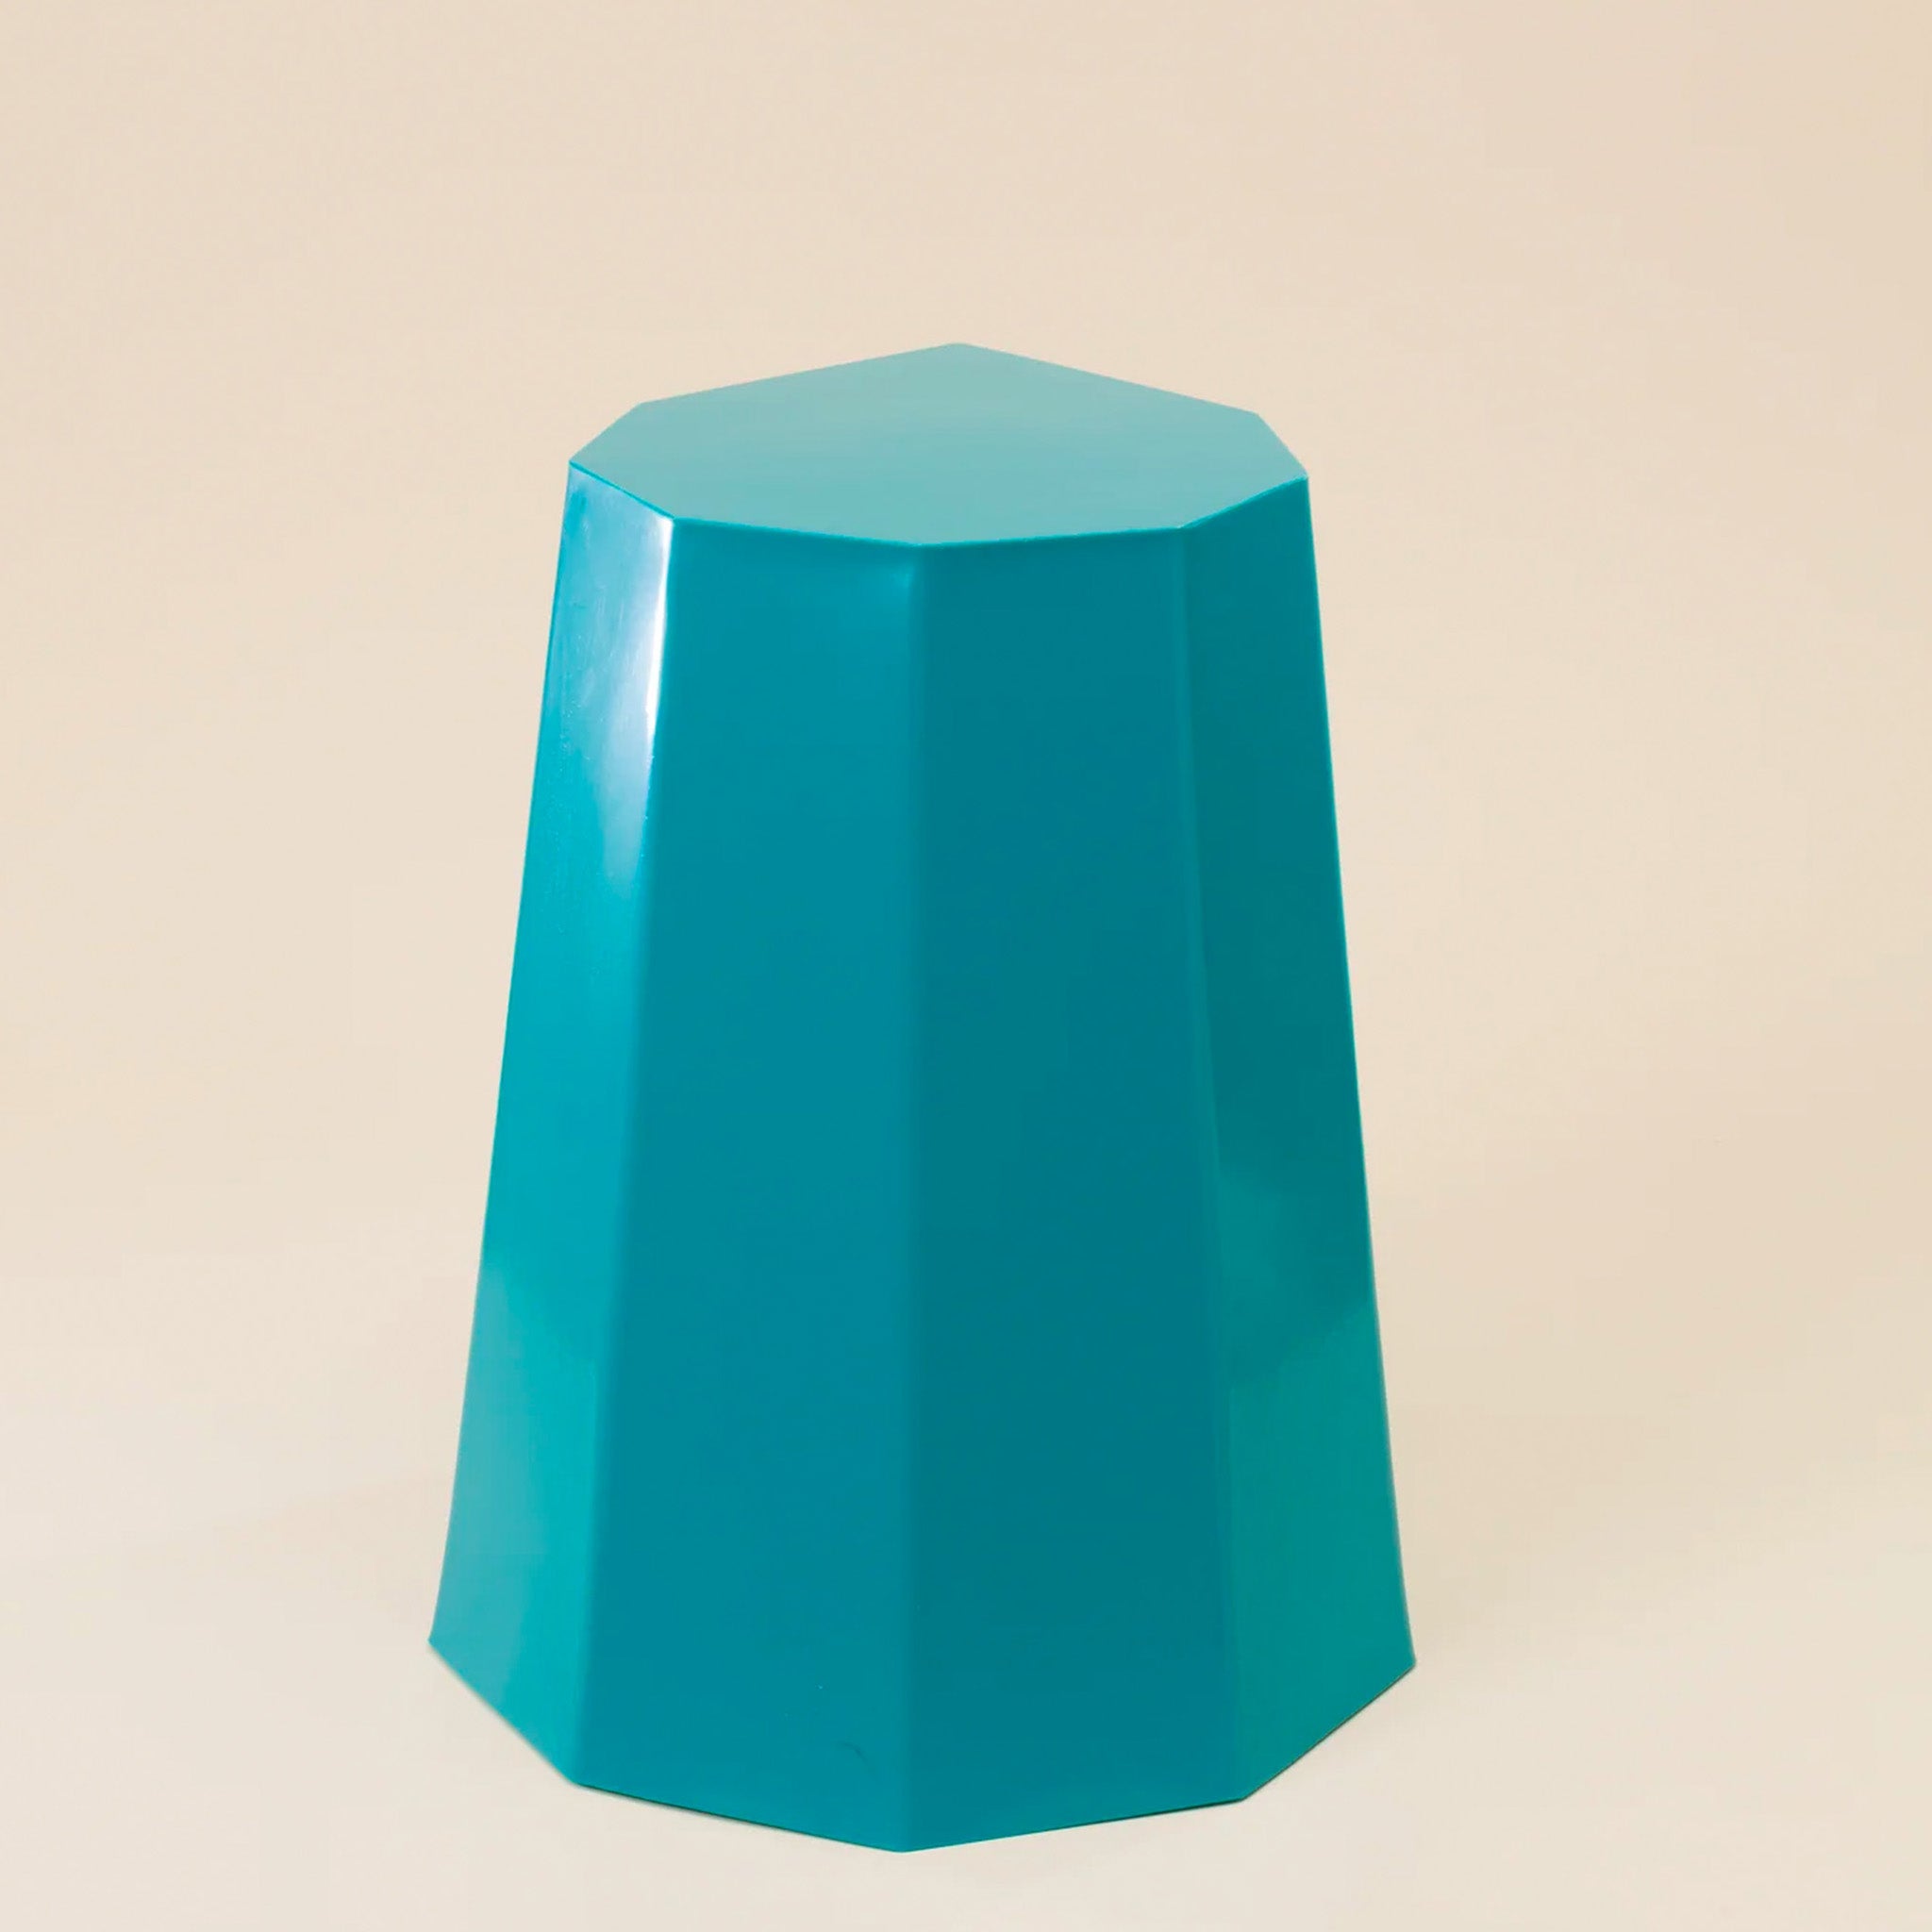 Clearance Arnold Circus Stool / Turquoise by Martino Gamper